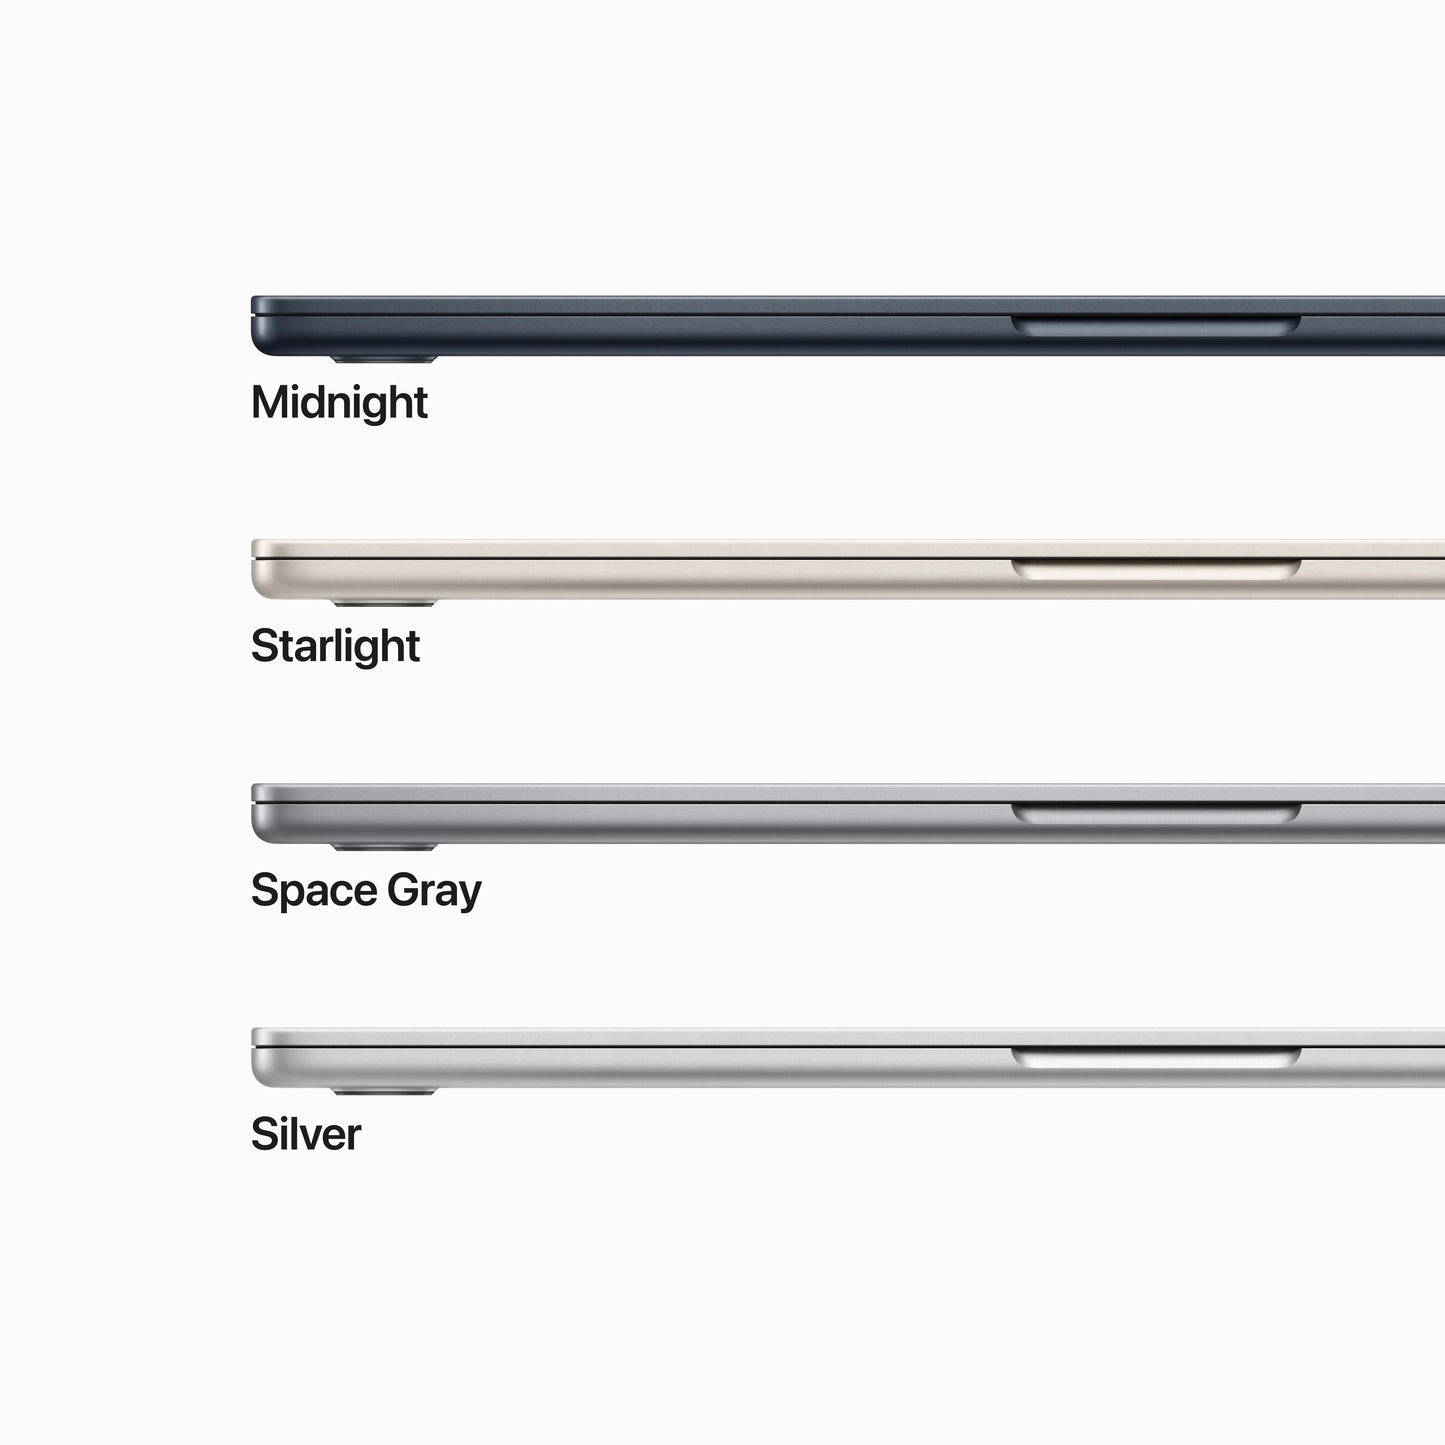 15-inch MacBook Air: Apple M2 chip with 8‑core CPU and 10‑core GPU, 512GB SSD - Midnight